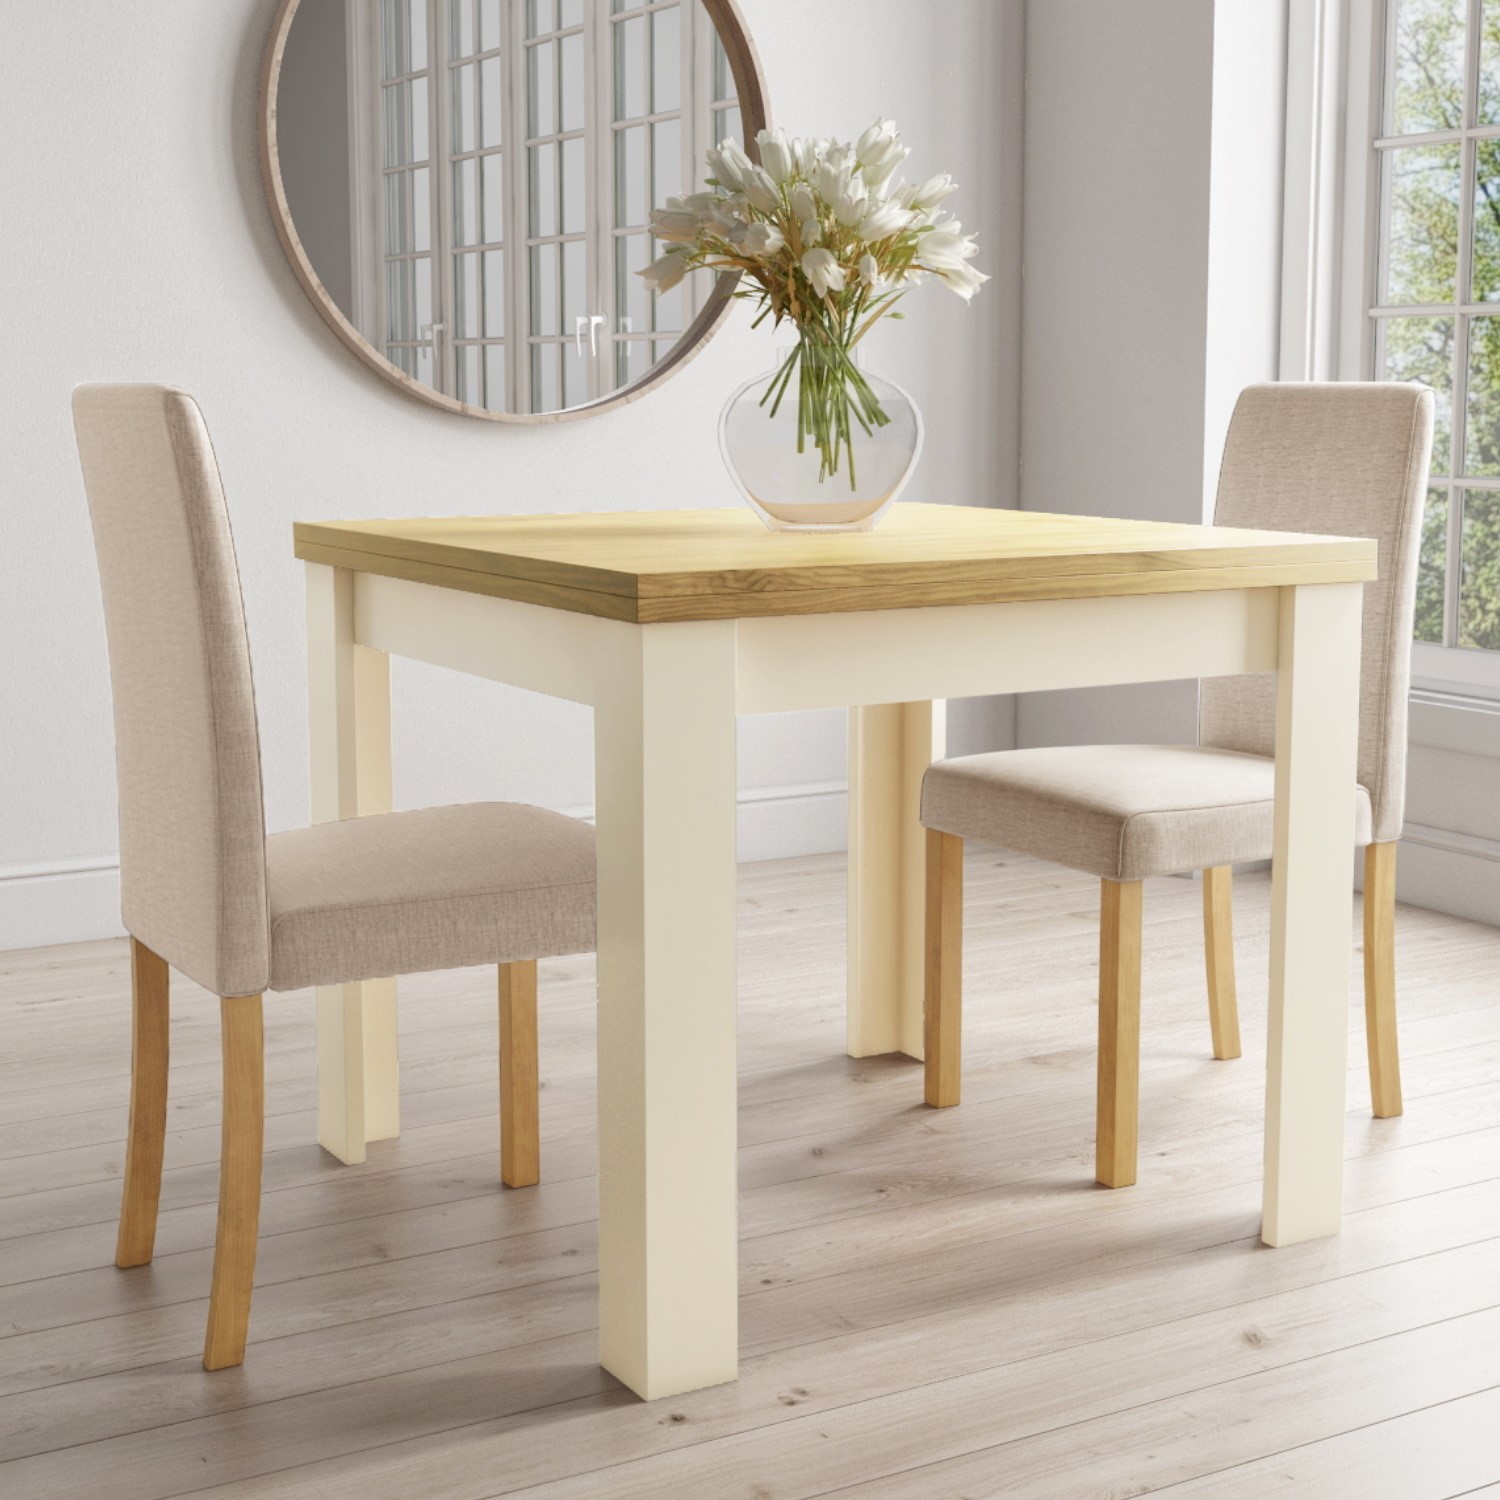 Cream And Oak 2 Seater Dining Set With, 2 Seater Dining Table And Chairs Uk